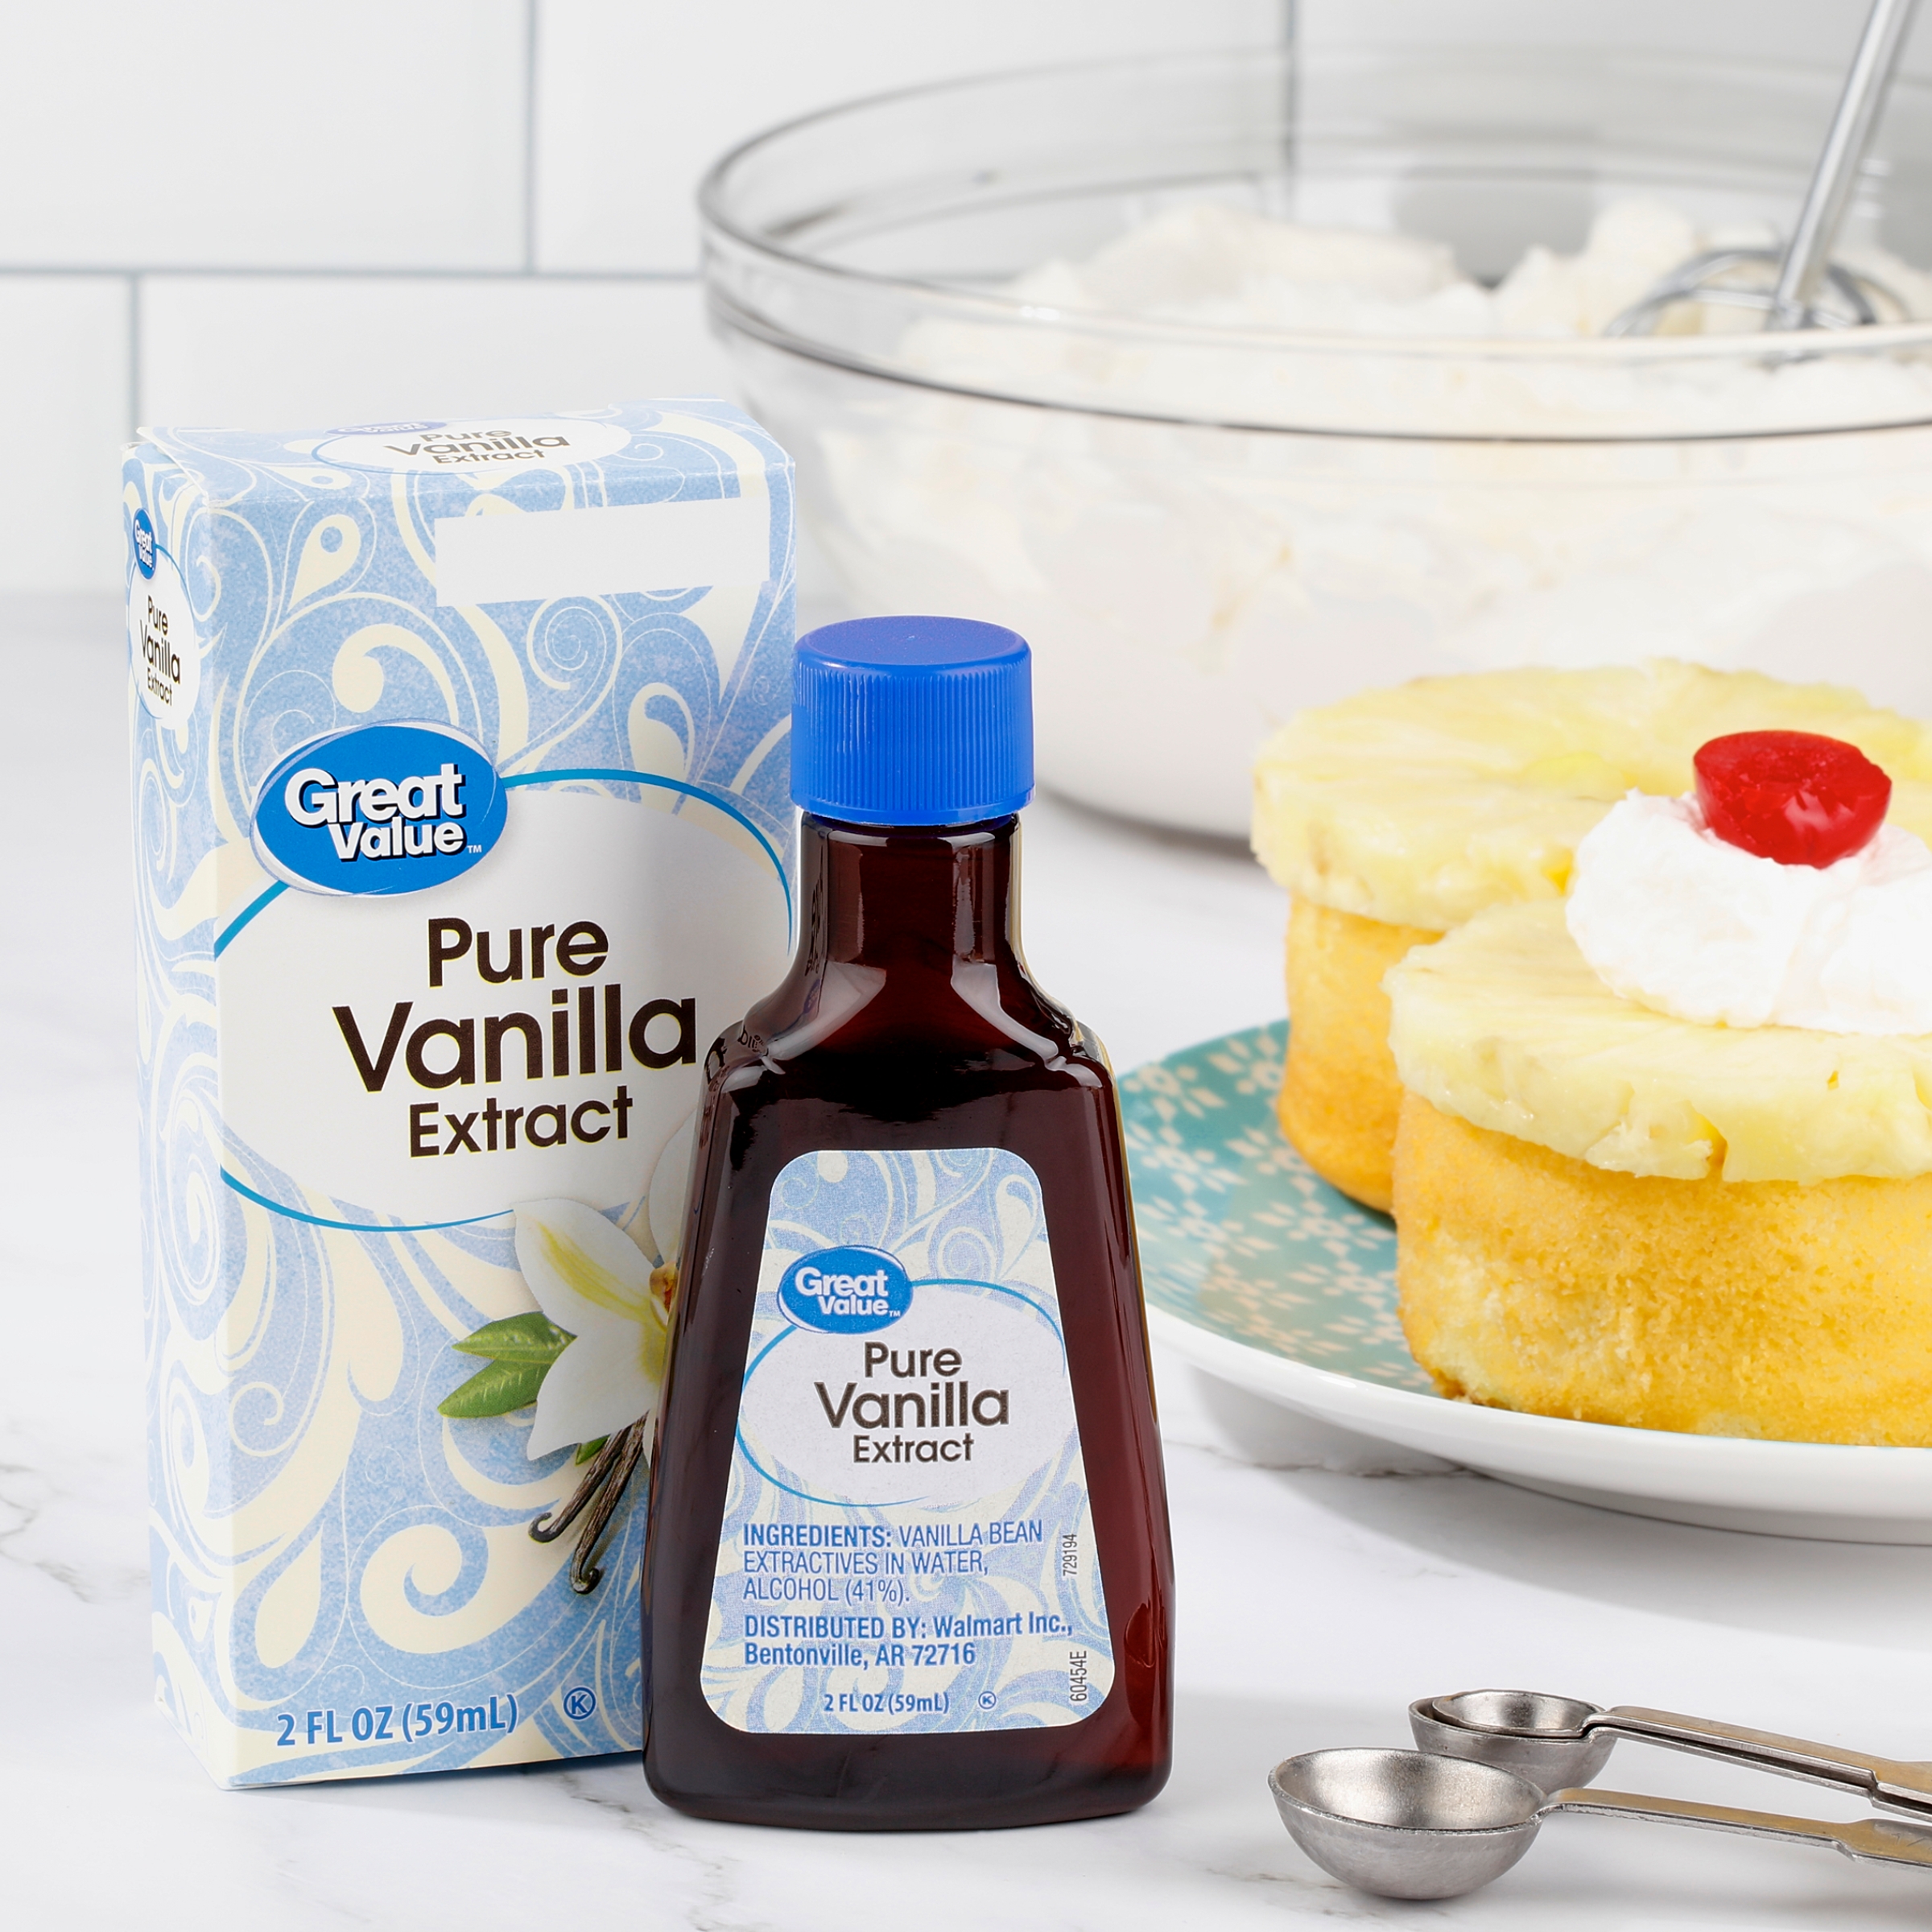 Great Value Pure Vanilla Extract, 1 fl oz (Ambient, Plastic Container) - image 2 of 7